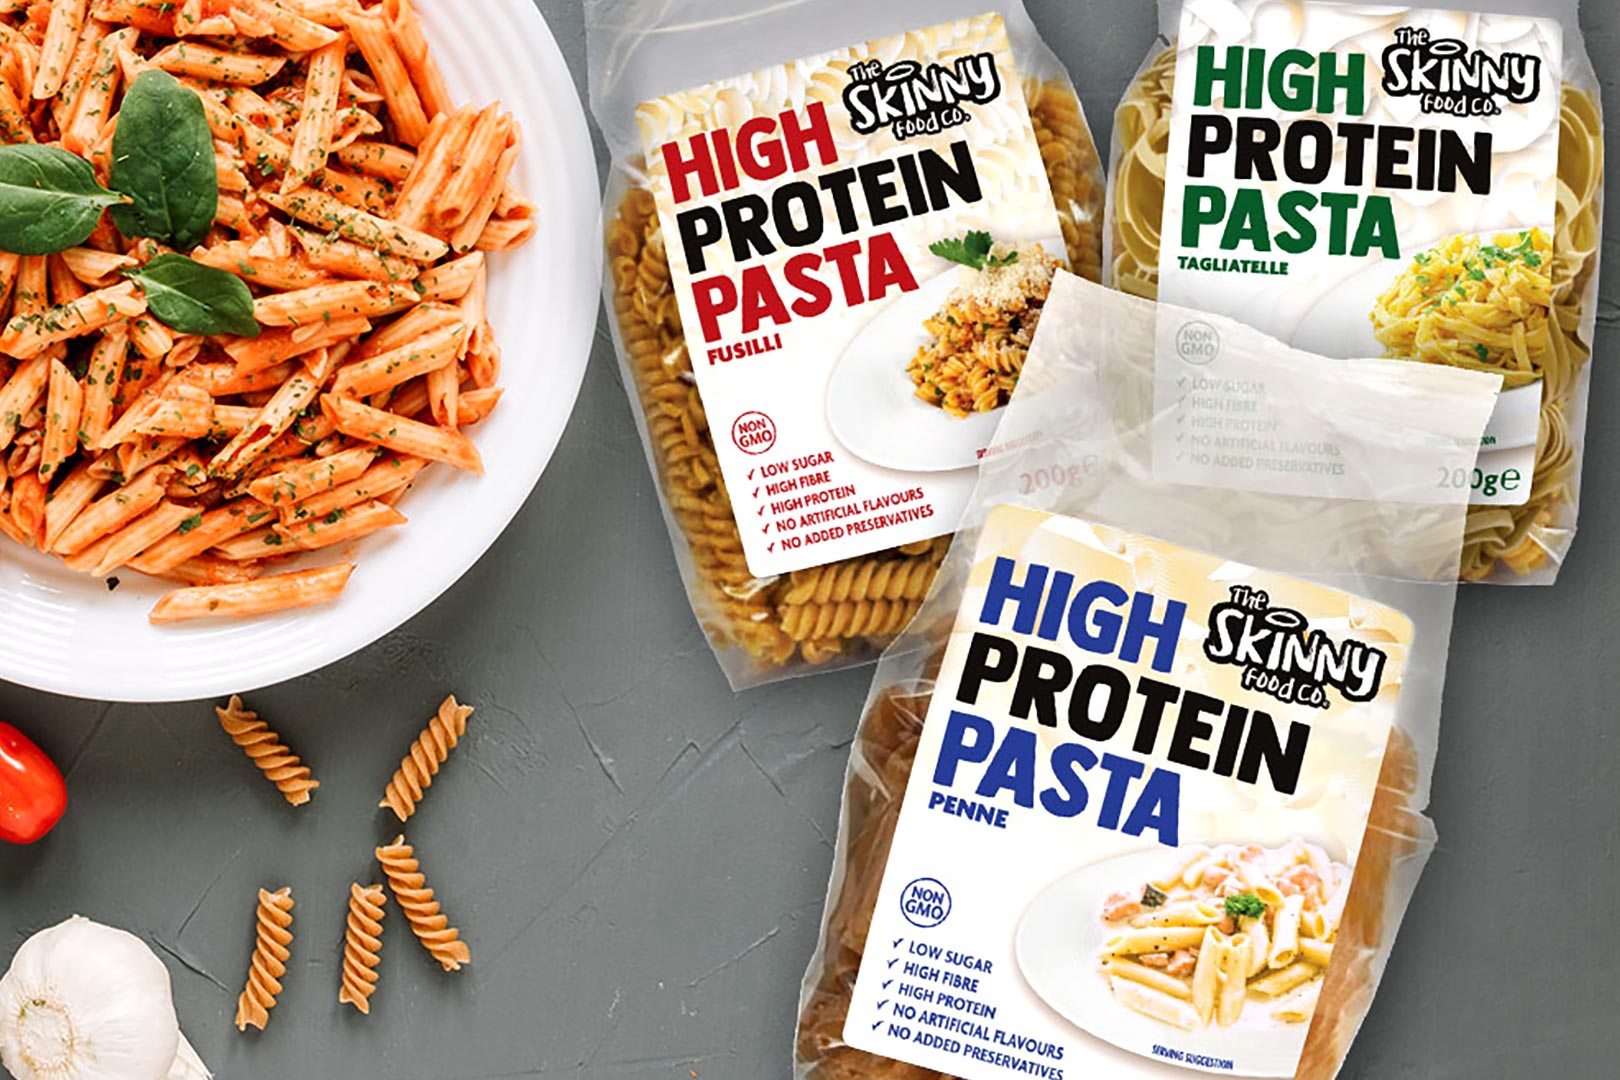 https://www.stack3d.com/wp-content/uploads/2023/08/skinny-food-co-high-protein-pasta.jpg